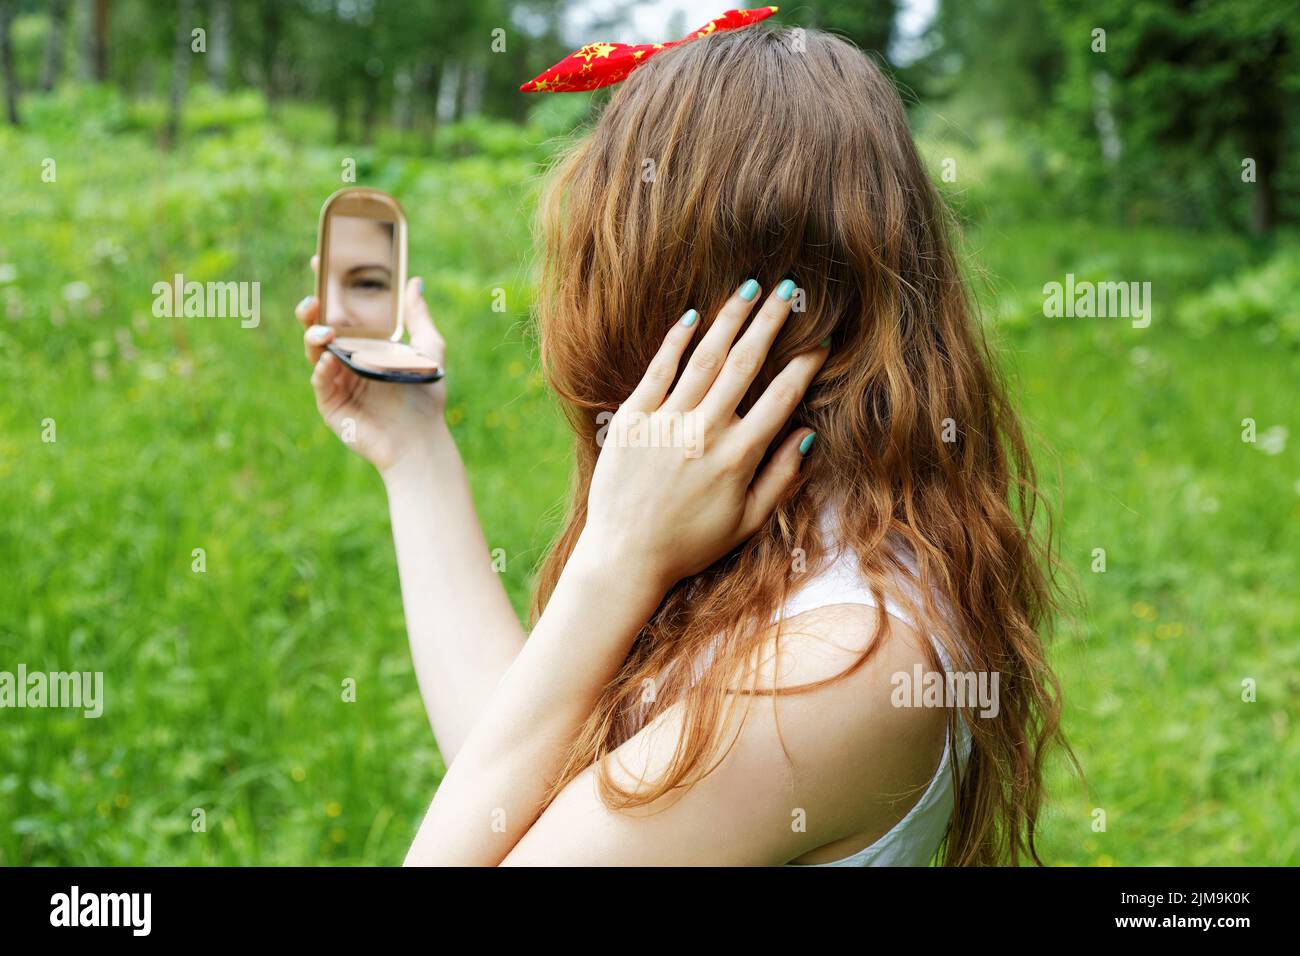 Girl with a bow on her head looking into the mirror on the nature Stock Photo